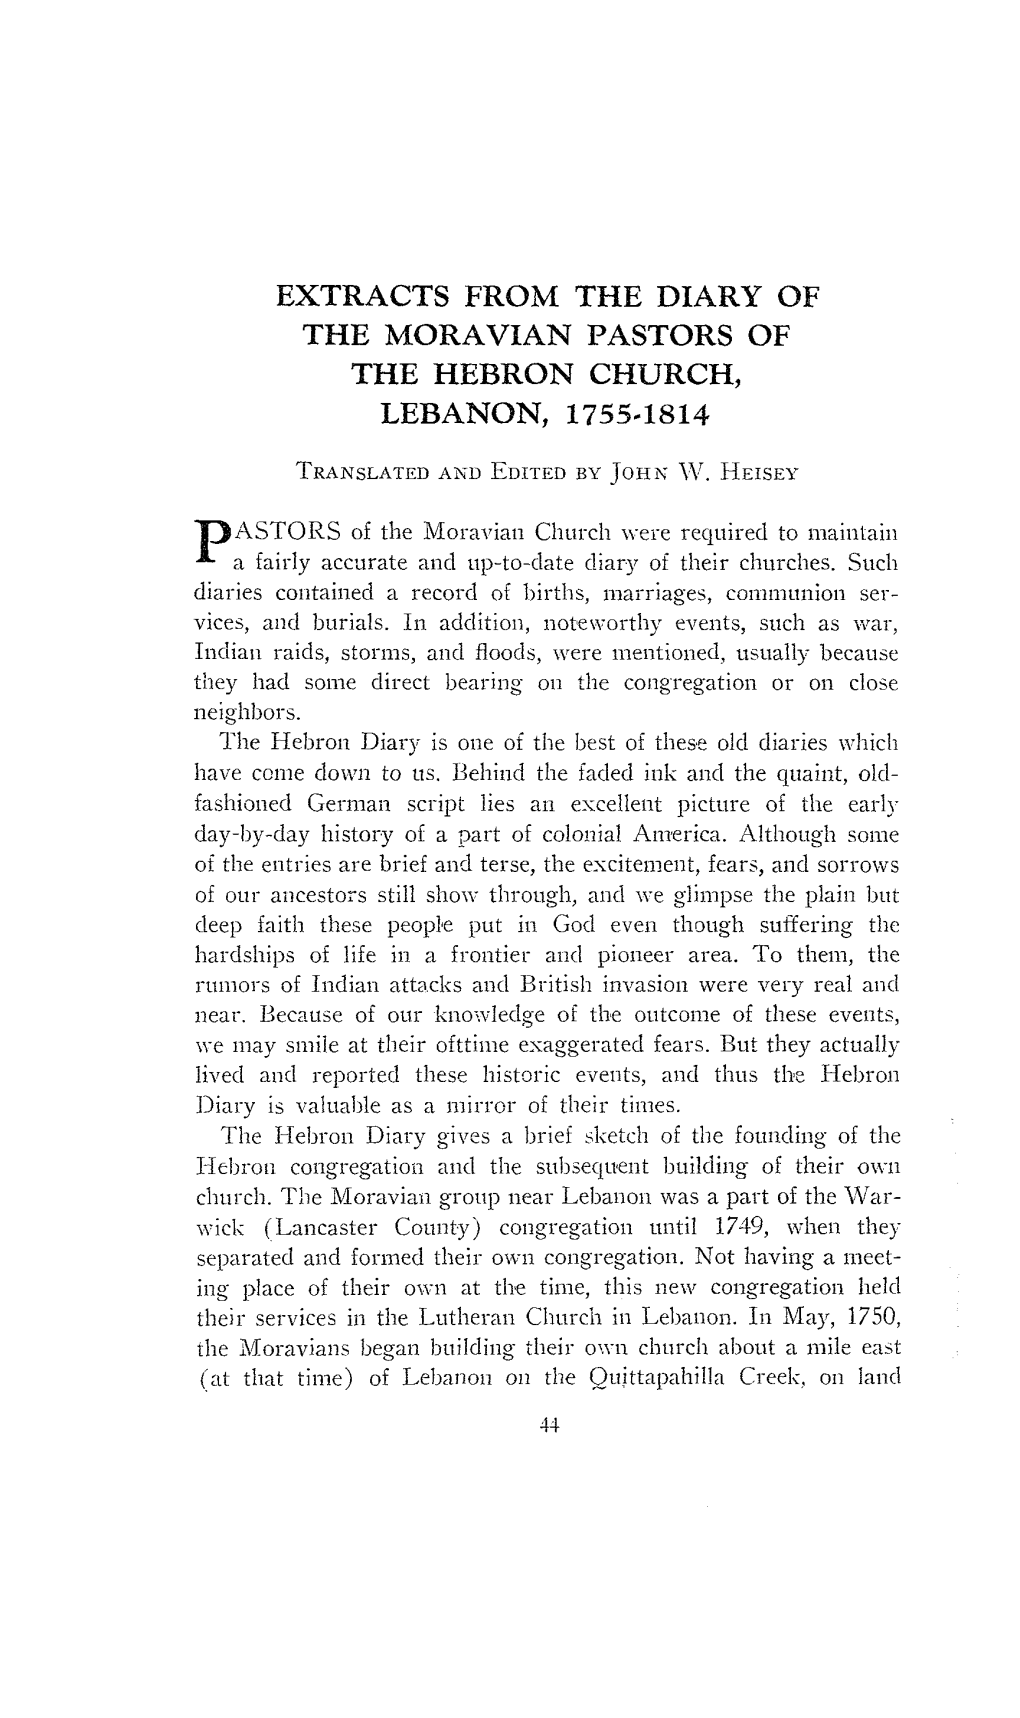 Extracts from the Diary of the Moravian Pastors of the Hebron Church, Lebanon, 1755-1814